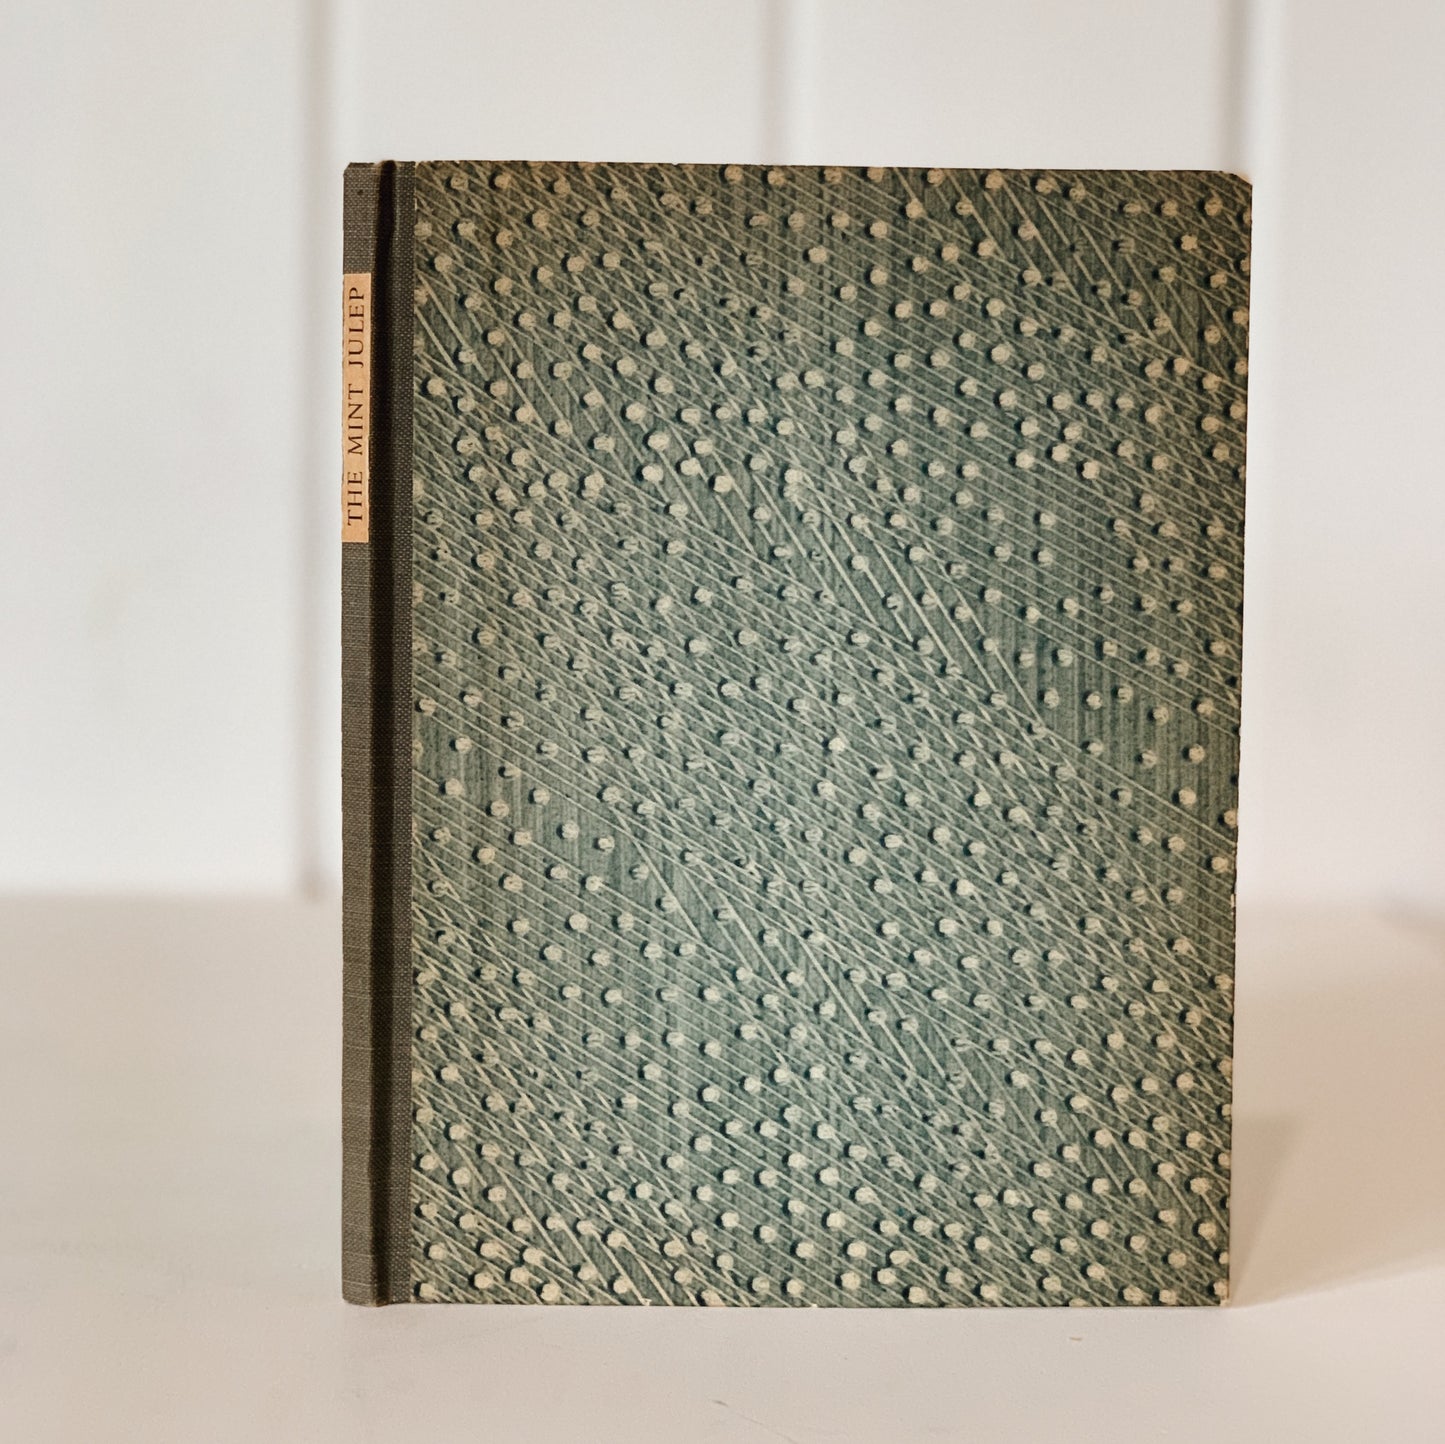 The Mint Julep: The Very Dream of Drinks, First Edition, 1949